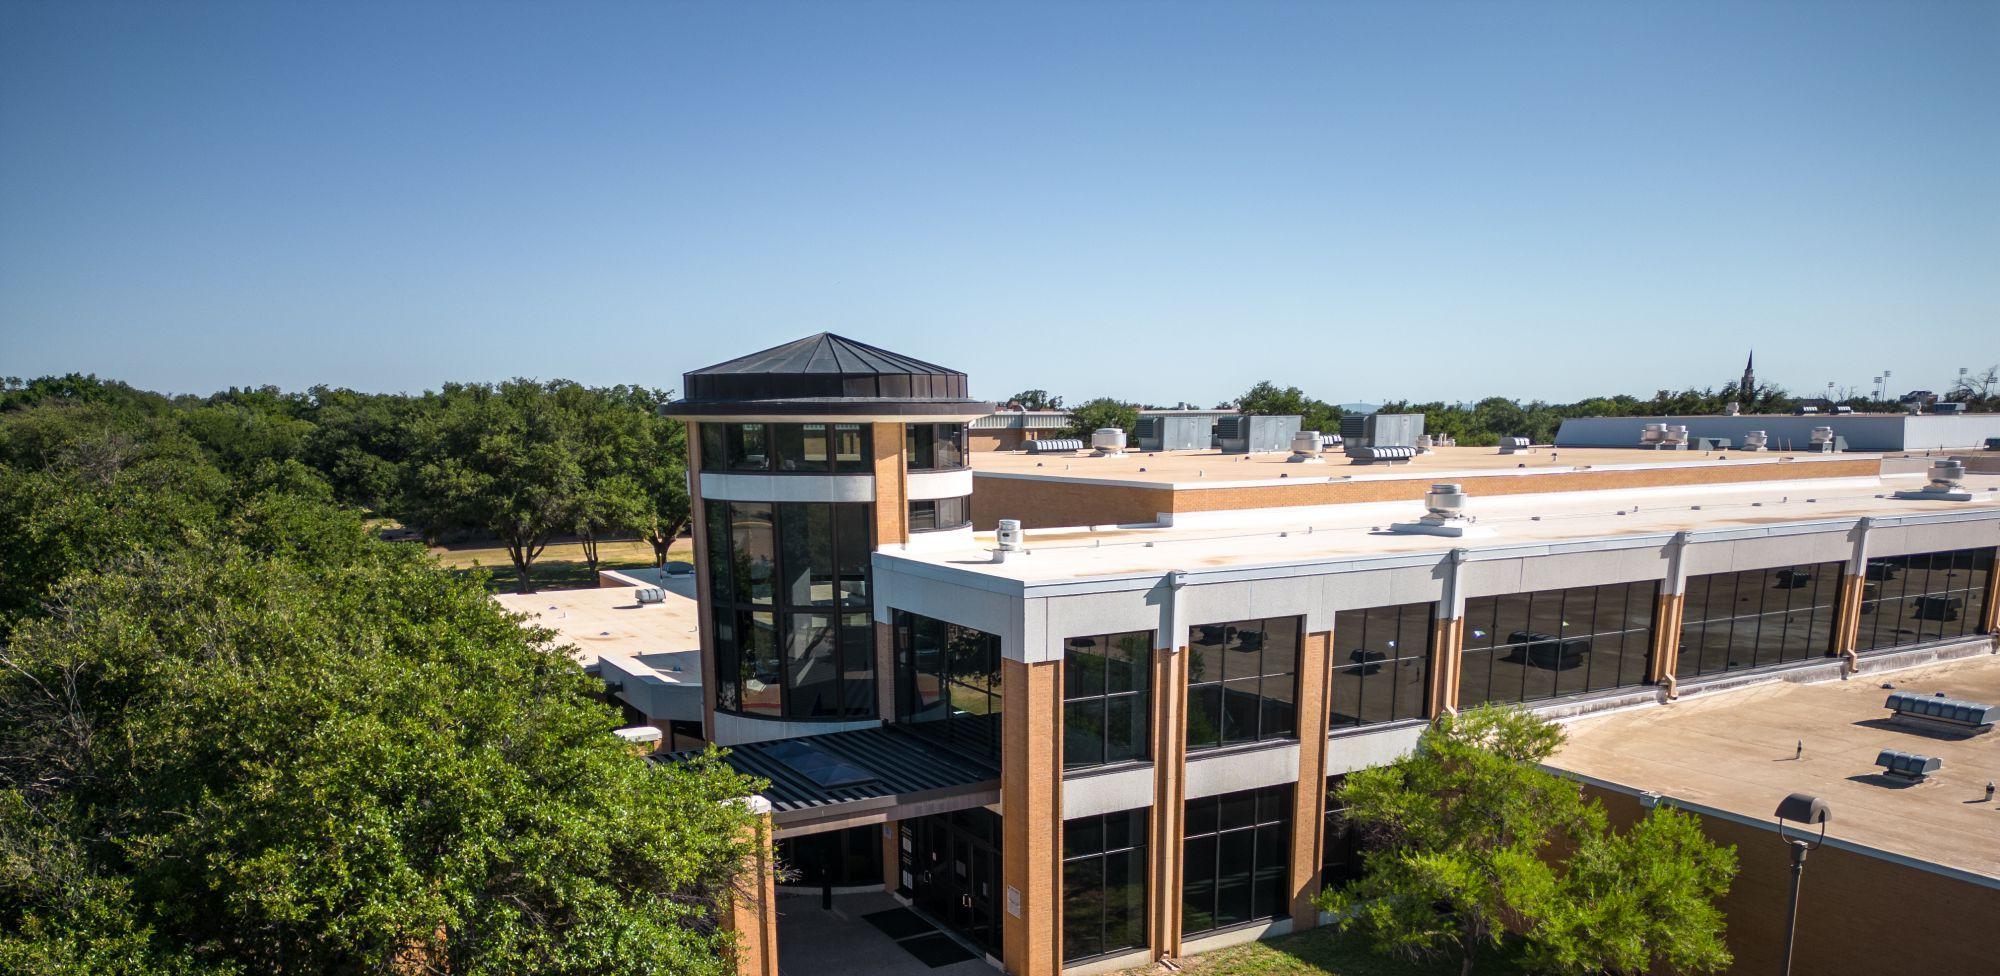 An aerial view of the Houston Harte University Center